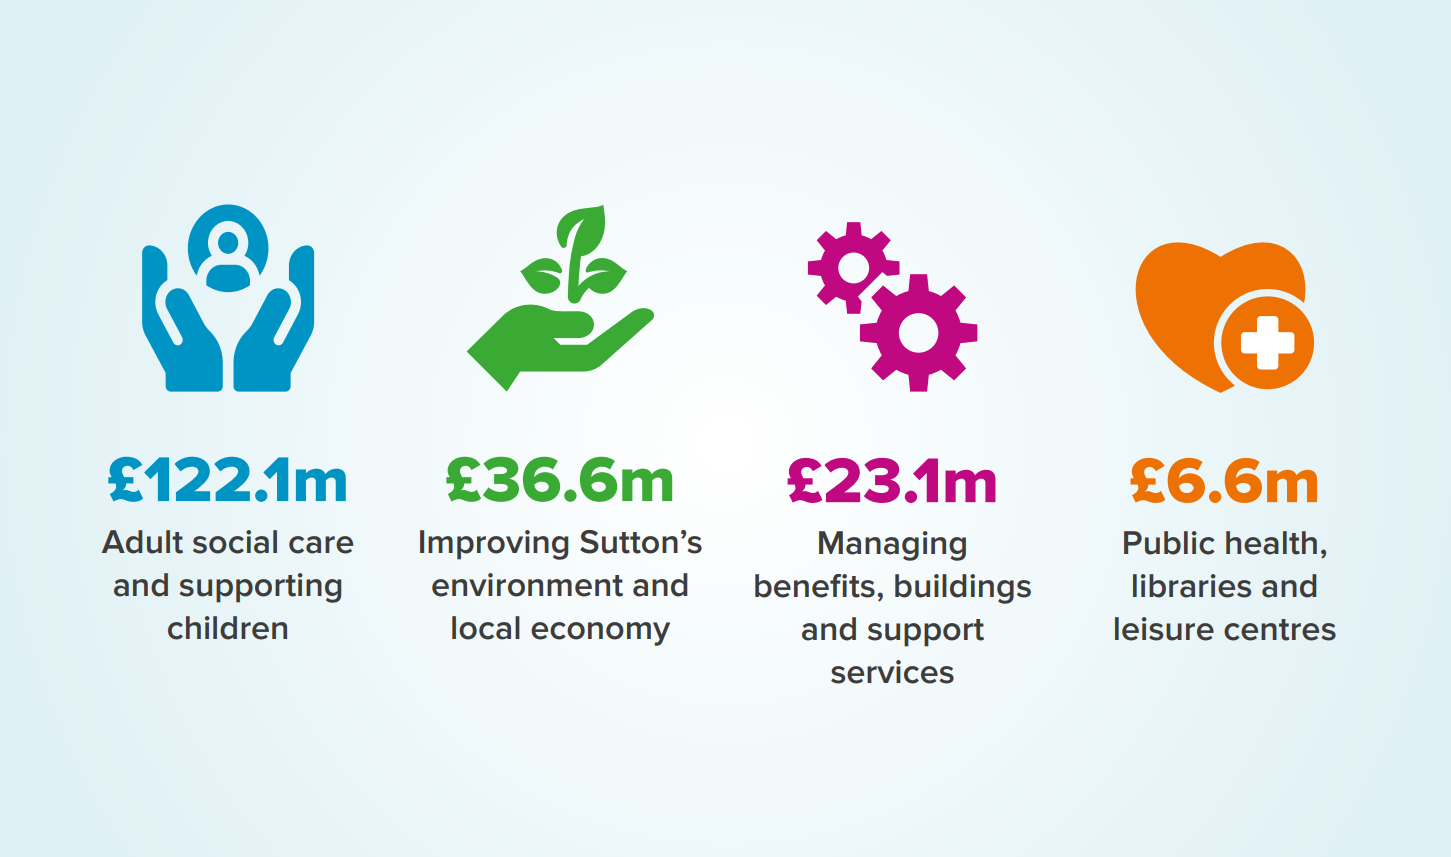 £122.1 million to adult social care and supporting children, £36.6 millions to improbing Suttons environment and local economy, £23.1 million to managing benefits, buildings and support services and £6.6 millions to public health. libraries and leisure centres.